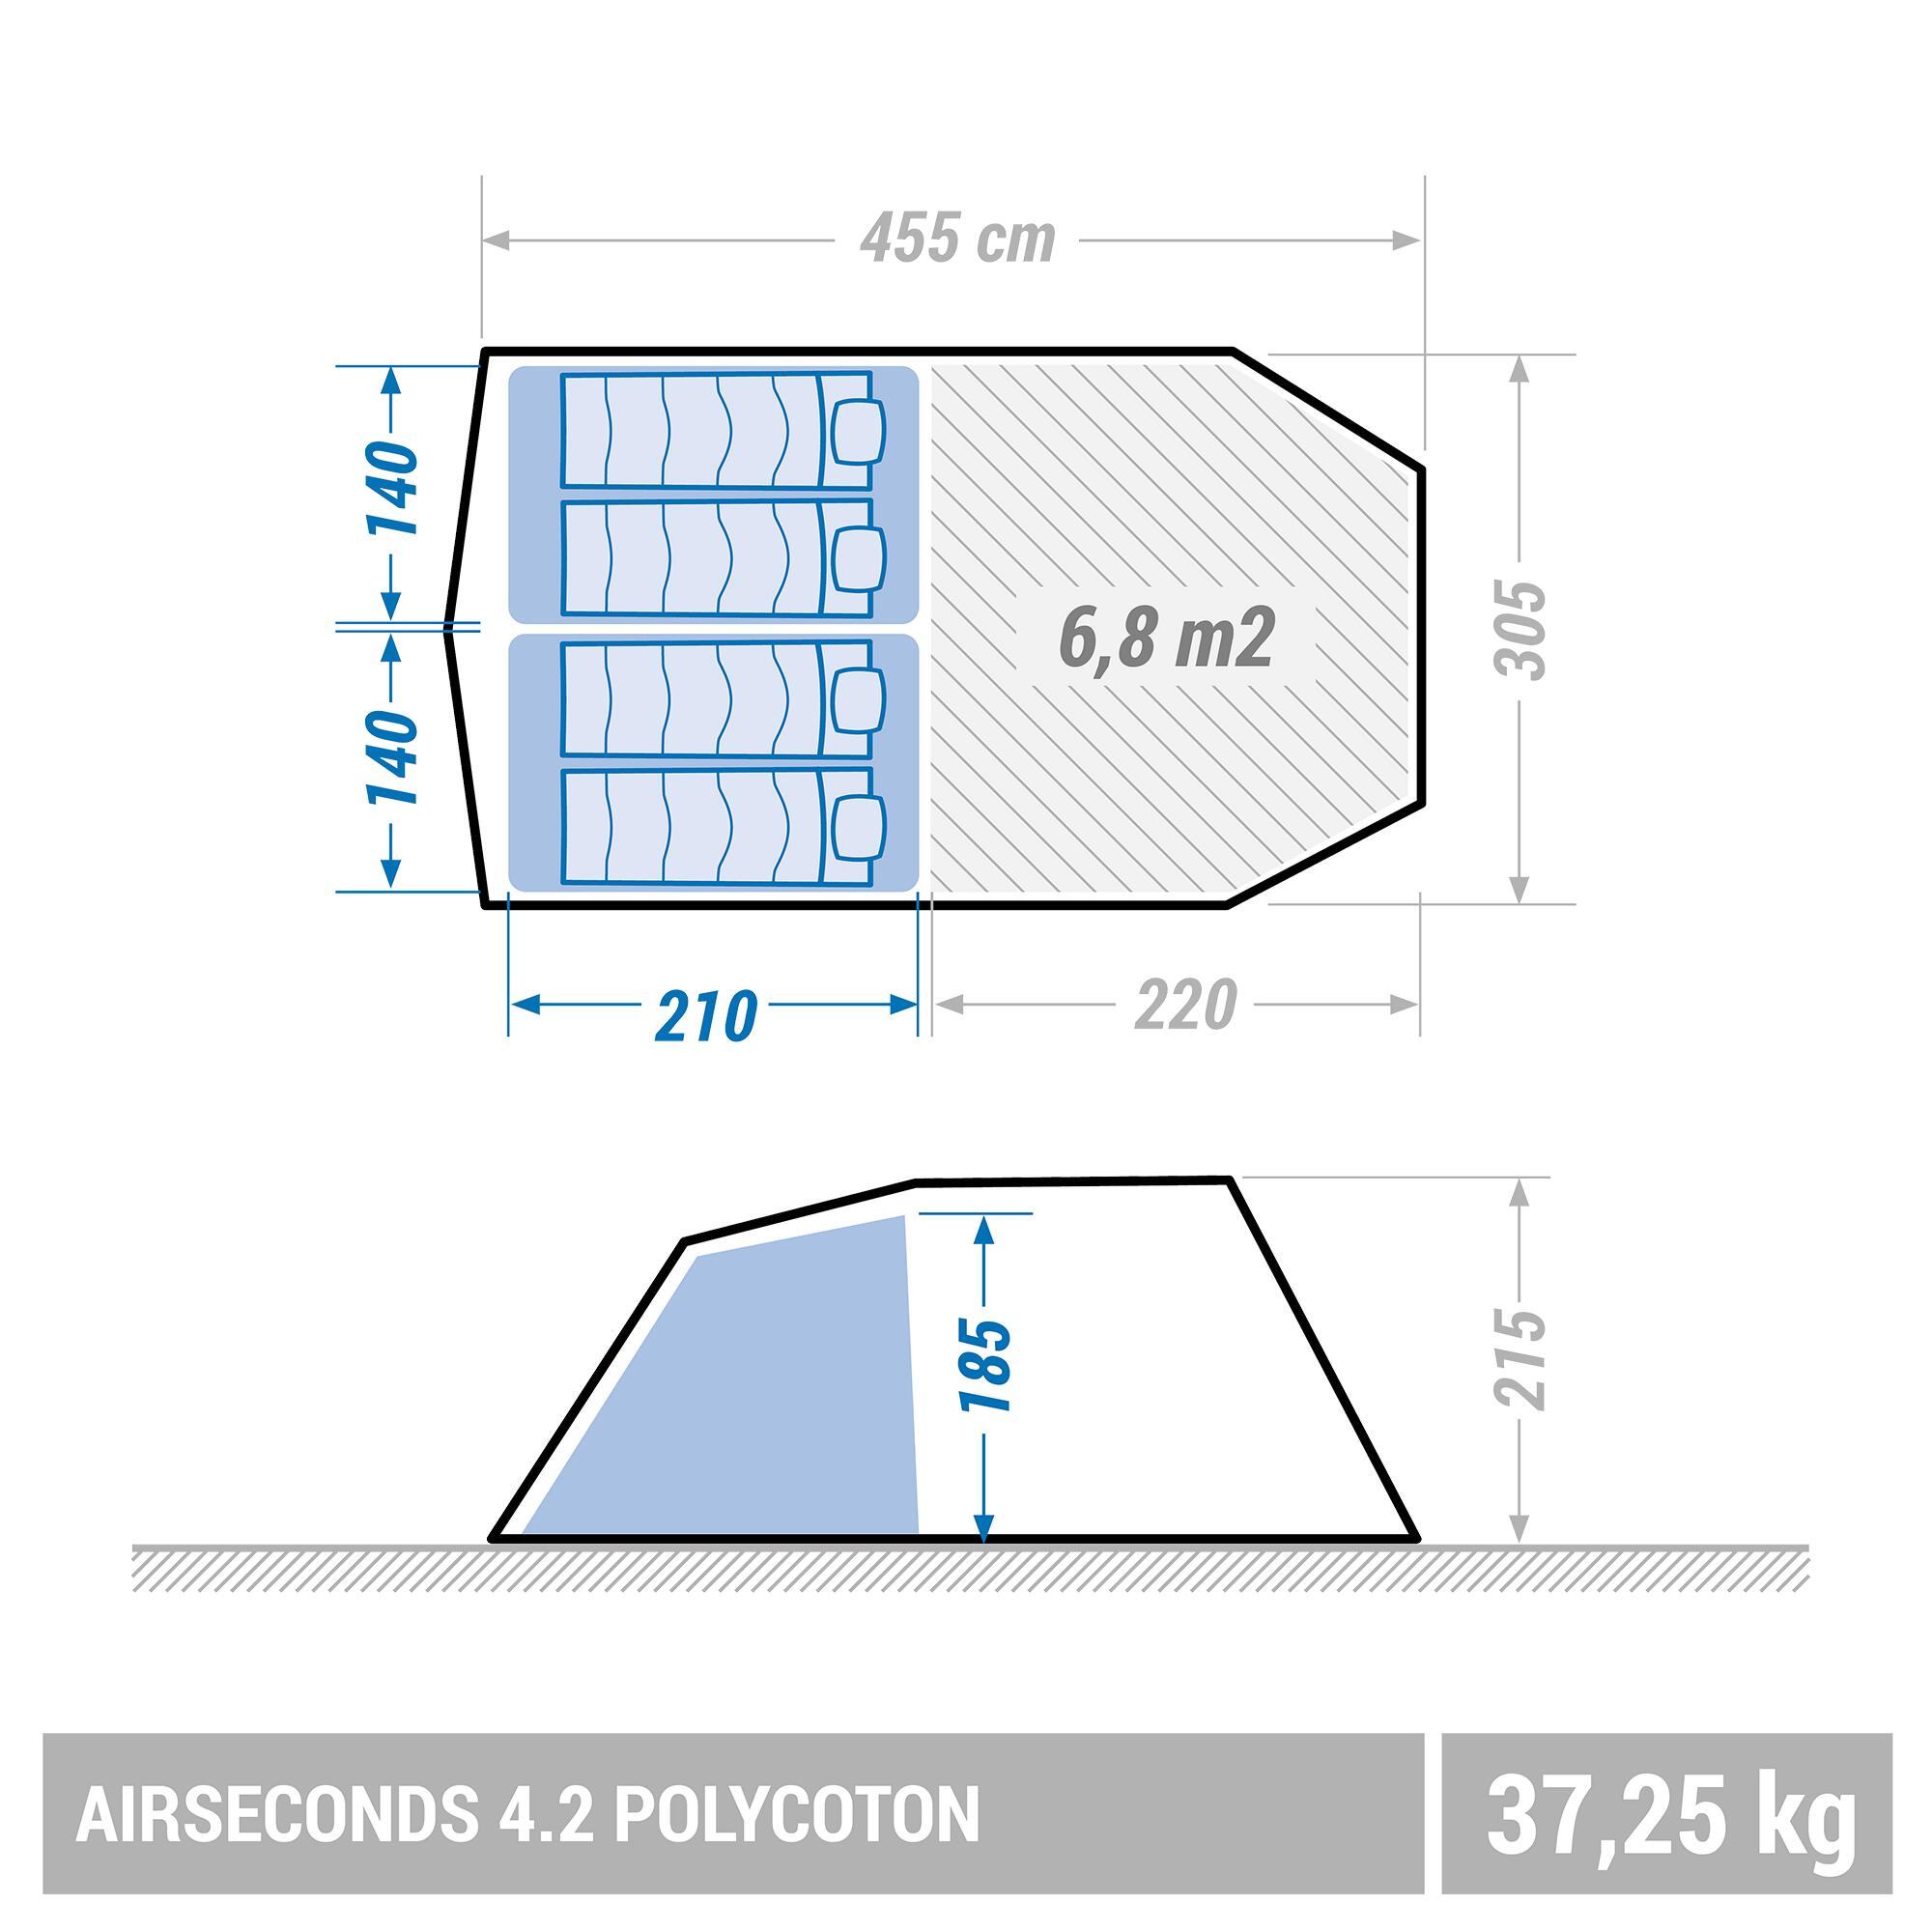 Inflatable camping tent - AirSeconds 4.2 Polycotton - 4 Person - 2 Bedrooms 2/28